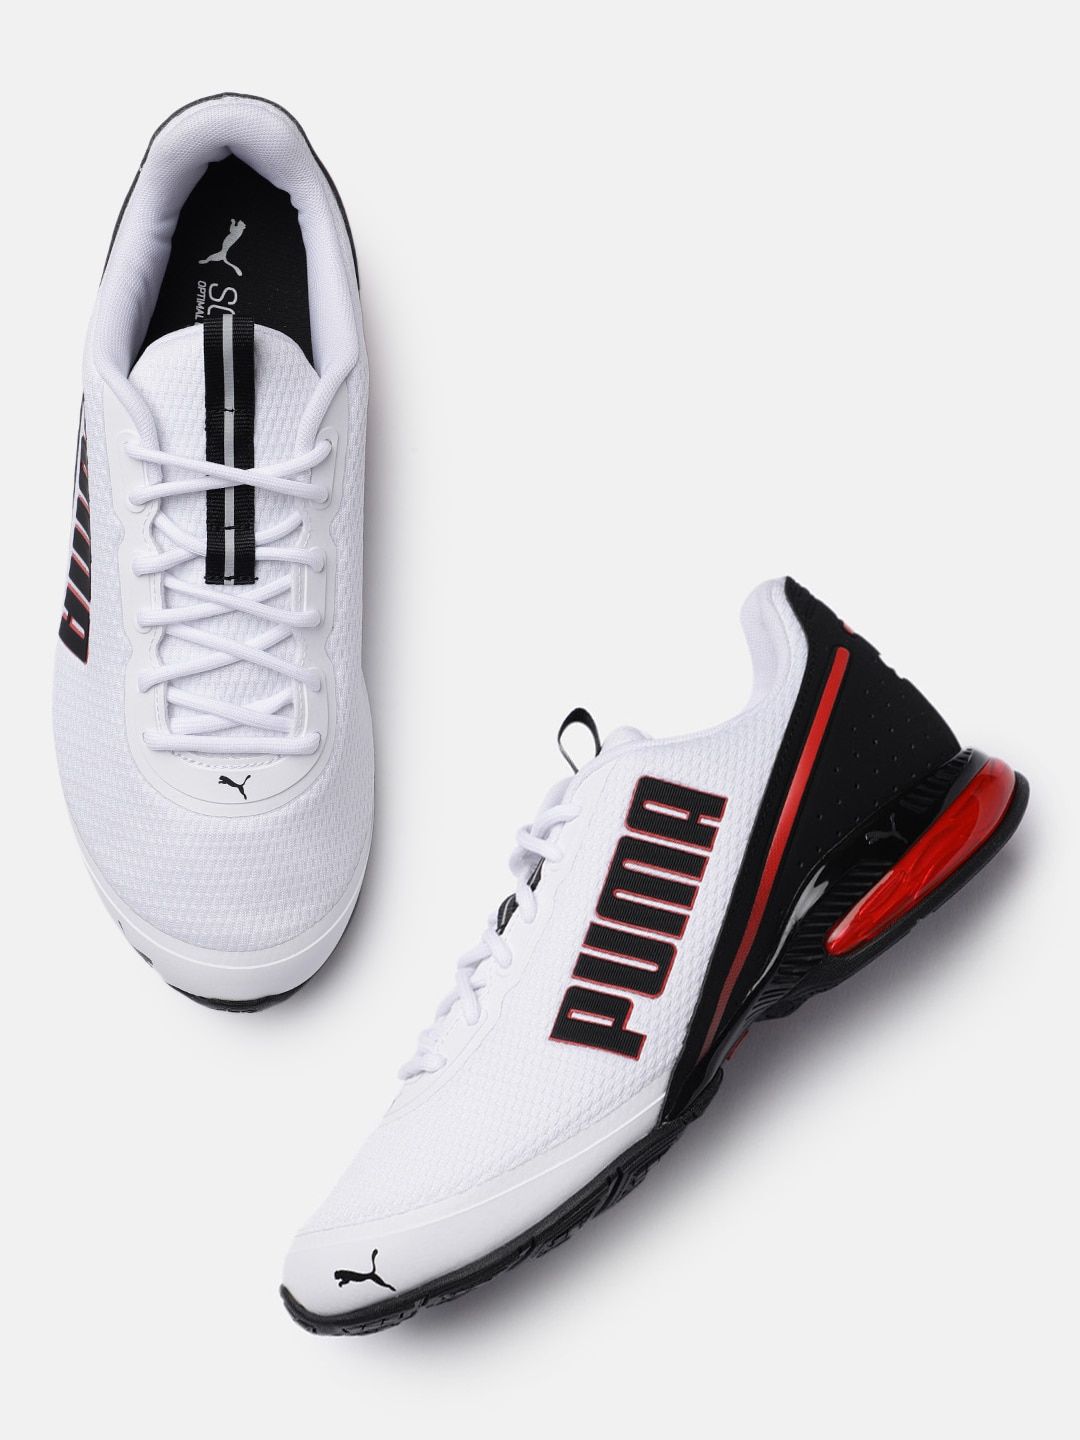 Puma Unisex White & Black Cell Divide Running Shoes Price in India